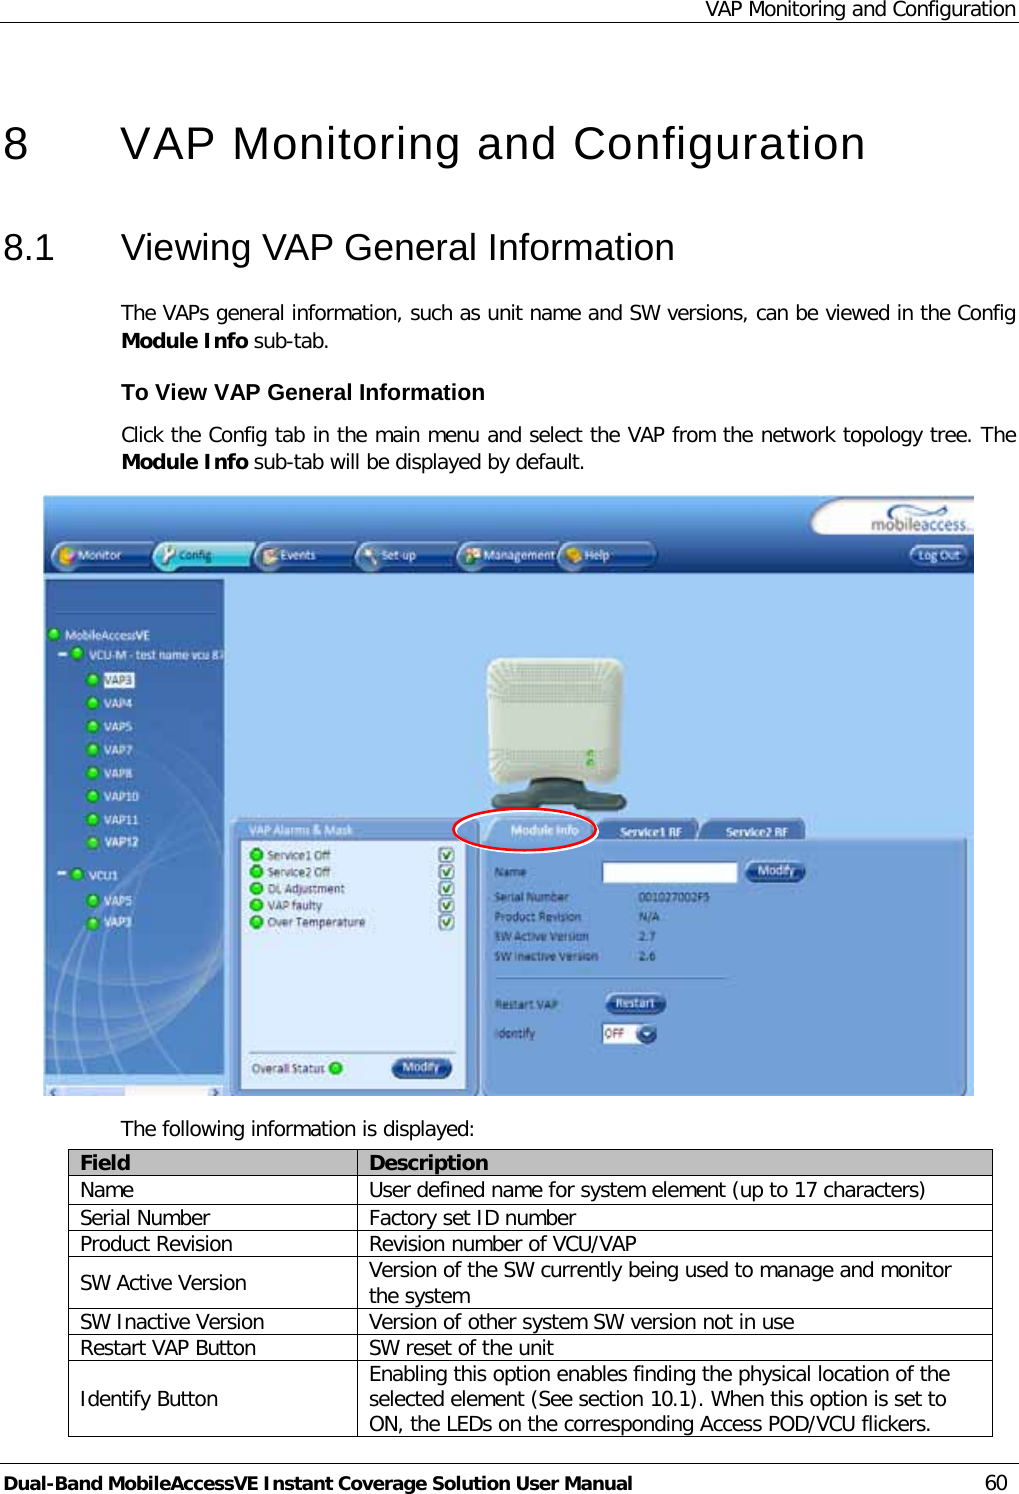 VAP Monitoring and Configuration Dual-Band MobileAccessVE Instant Coverage Solution User Manual 60  8  VAP Monitoring and Configuration  8.1  Viewing VAP General Information The VAPs general information, such as unit name and SW versions, can be viewed in the Config Module Info sub-tab. To View VAP General Information Click the Config tab in the main menu and select the VAP from the network topology tree. The Module Info sub-tab will be displayed by default.  The following information is displayed: Field Description Name User defined name for system element (up to 17 characters) Serial Number Factory set ID number Product Revision Revision number of VCU/VAP SW Active Version Version of the SW currently being used to manage and monitor the system SW Inactive Version Version of other system SW version not in use Restart VAP Button SW reset of the unit Identify Button Enabling this option enables finding the physical location of the selected element (See section  10.1). When this option is set to ON, the LEDs on the corresponding Access POD/VCU flickers. 